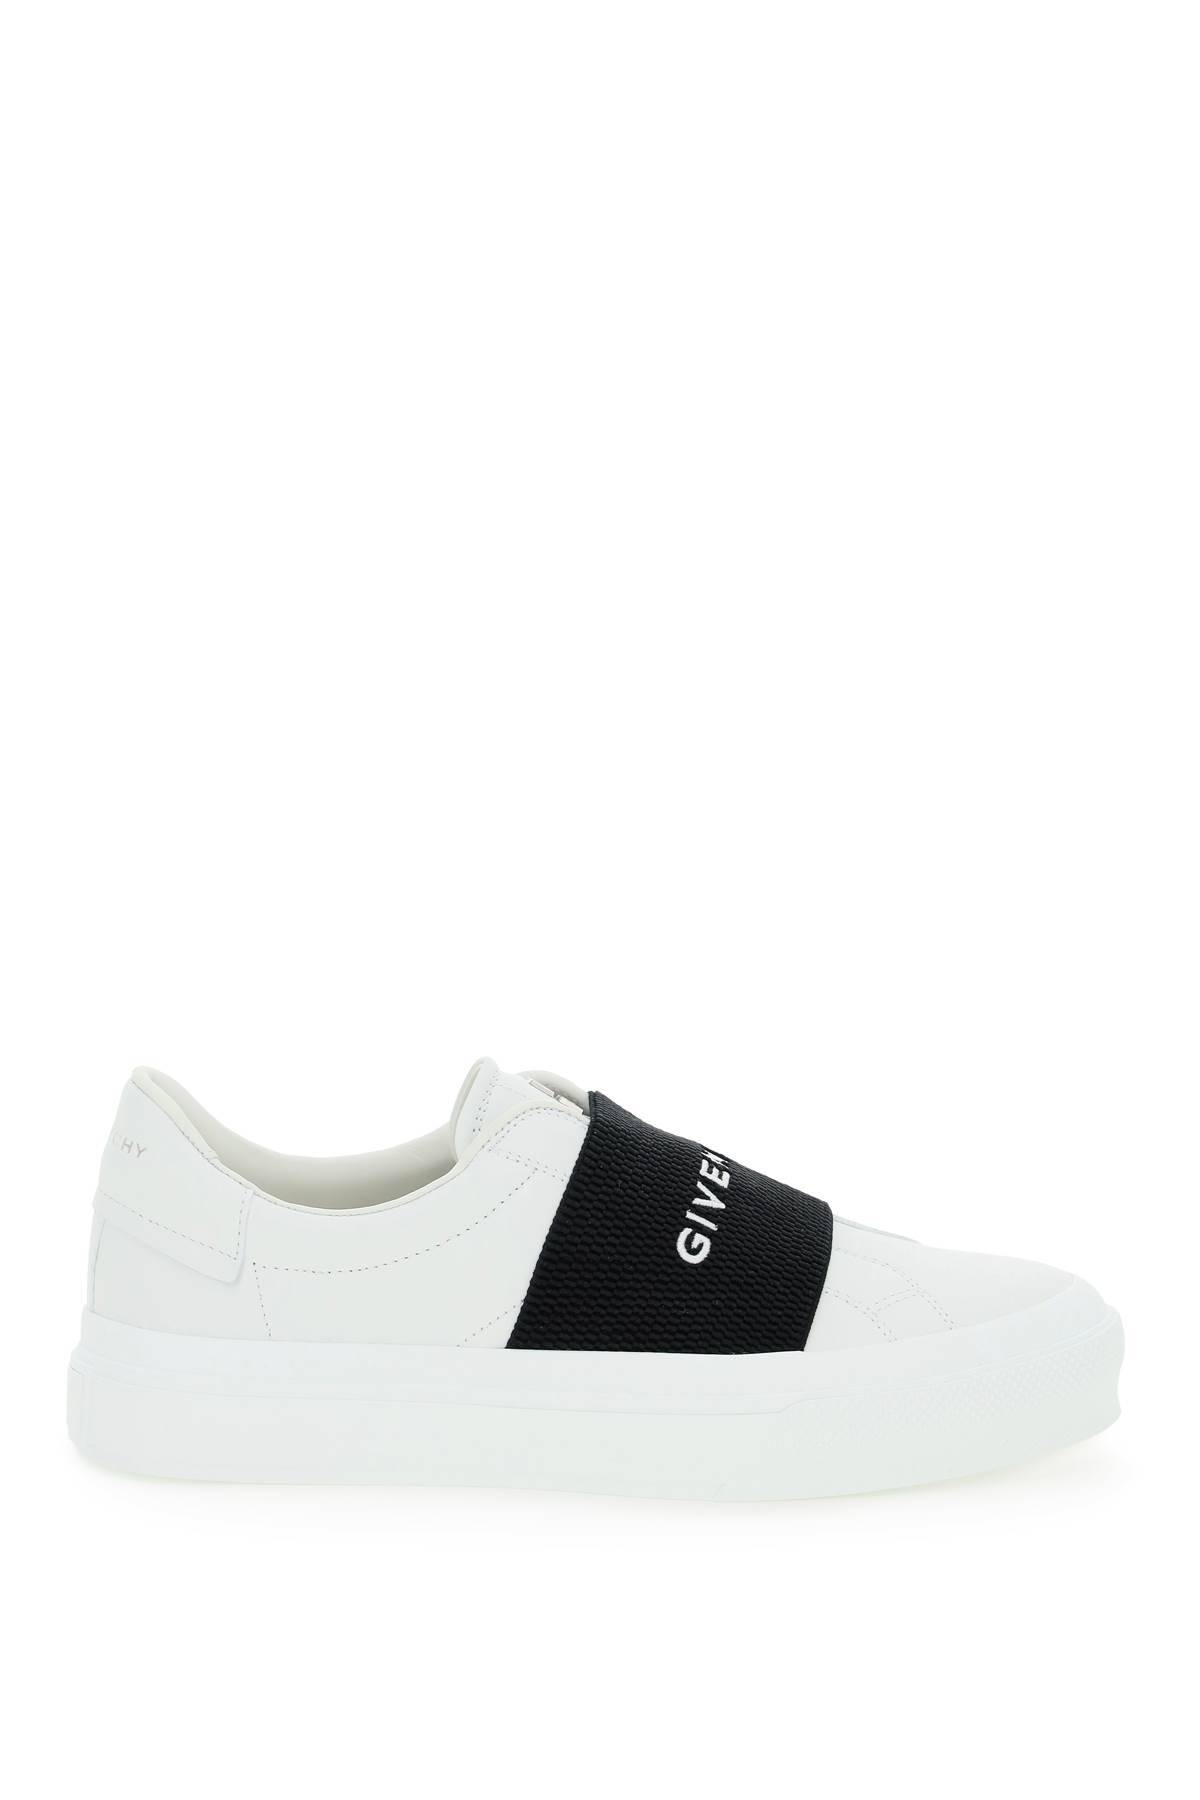 Shop Givenchy City Sport Sneakers In White,black